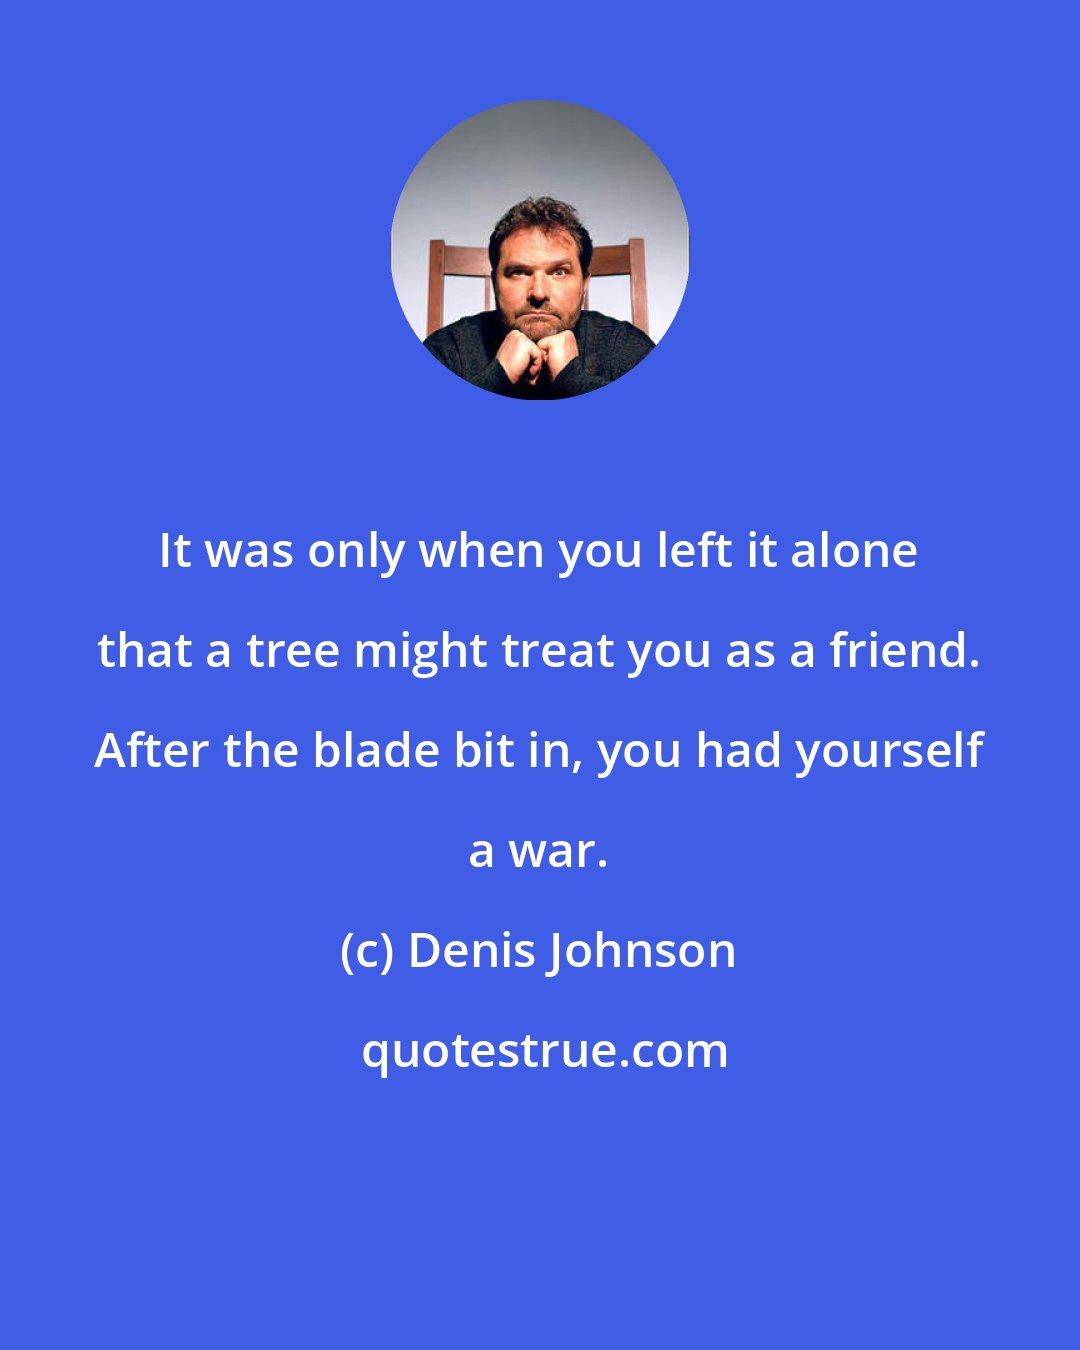 Denis Johnson: It was only when you left it alone that a tree might treat you as a friend. After the blade bit in, you had yourself a war.